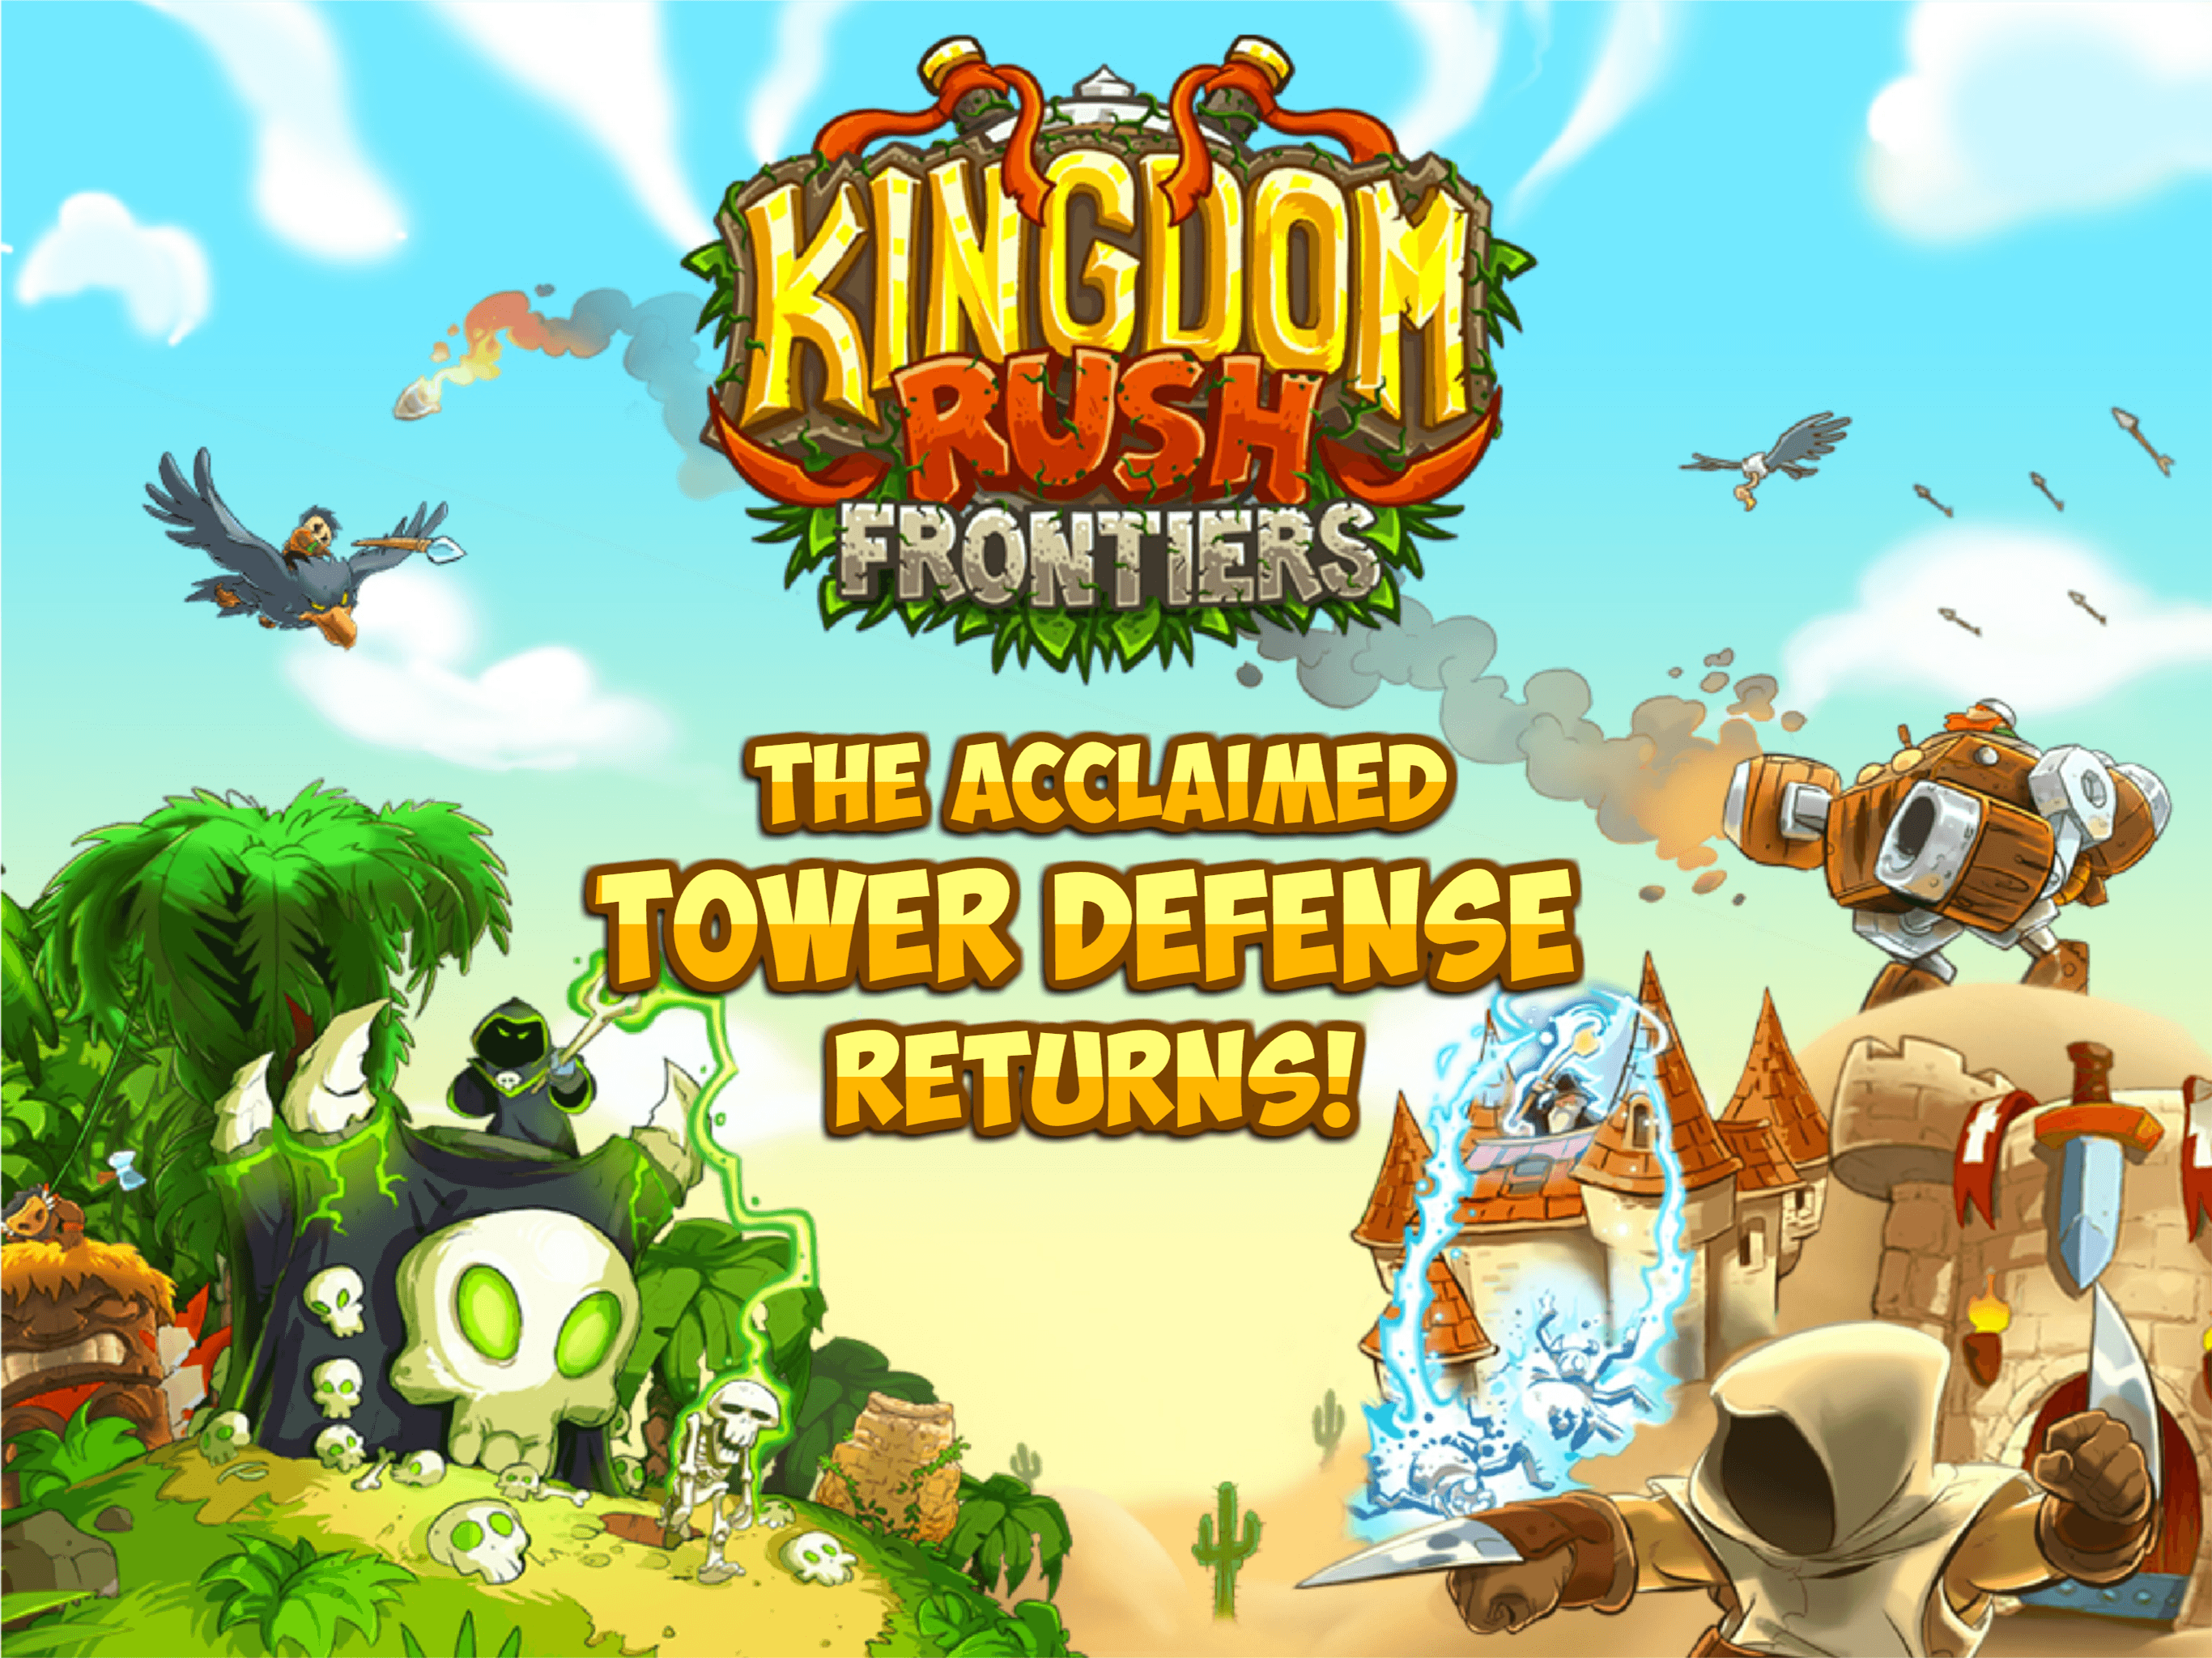 Kingdom rush frontiers pc download free